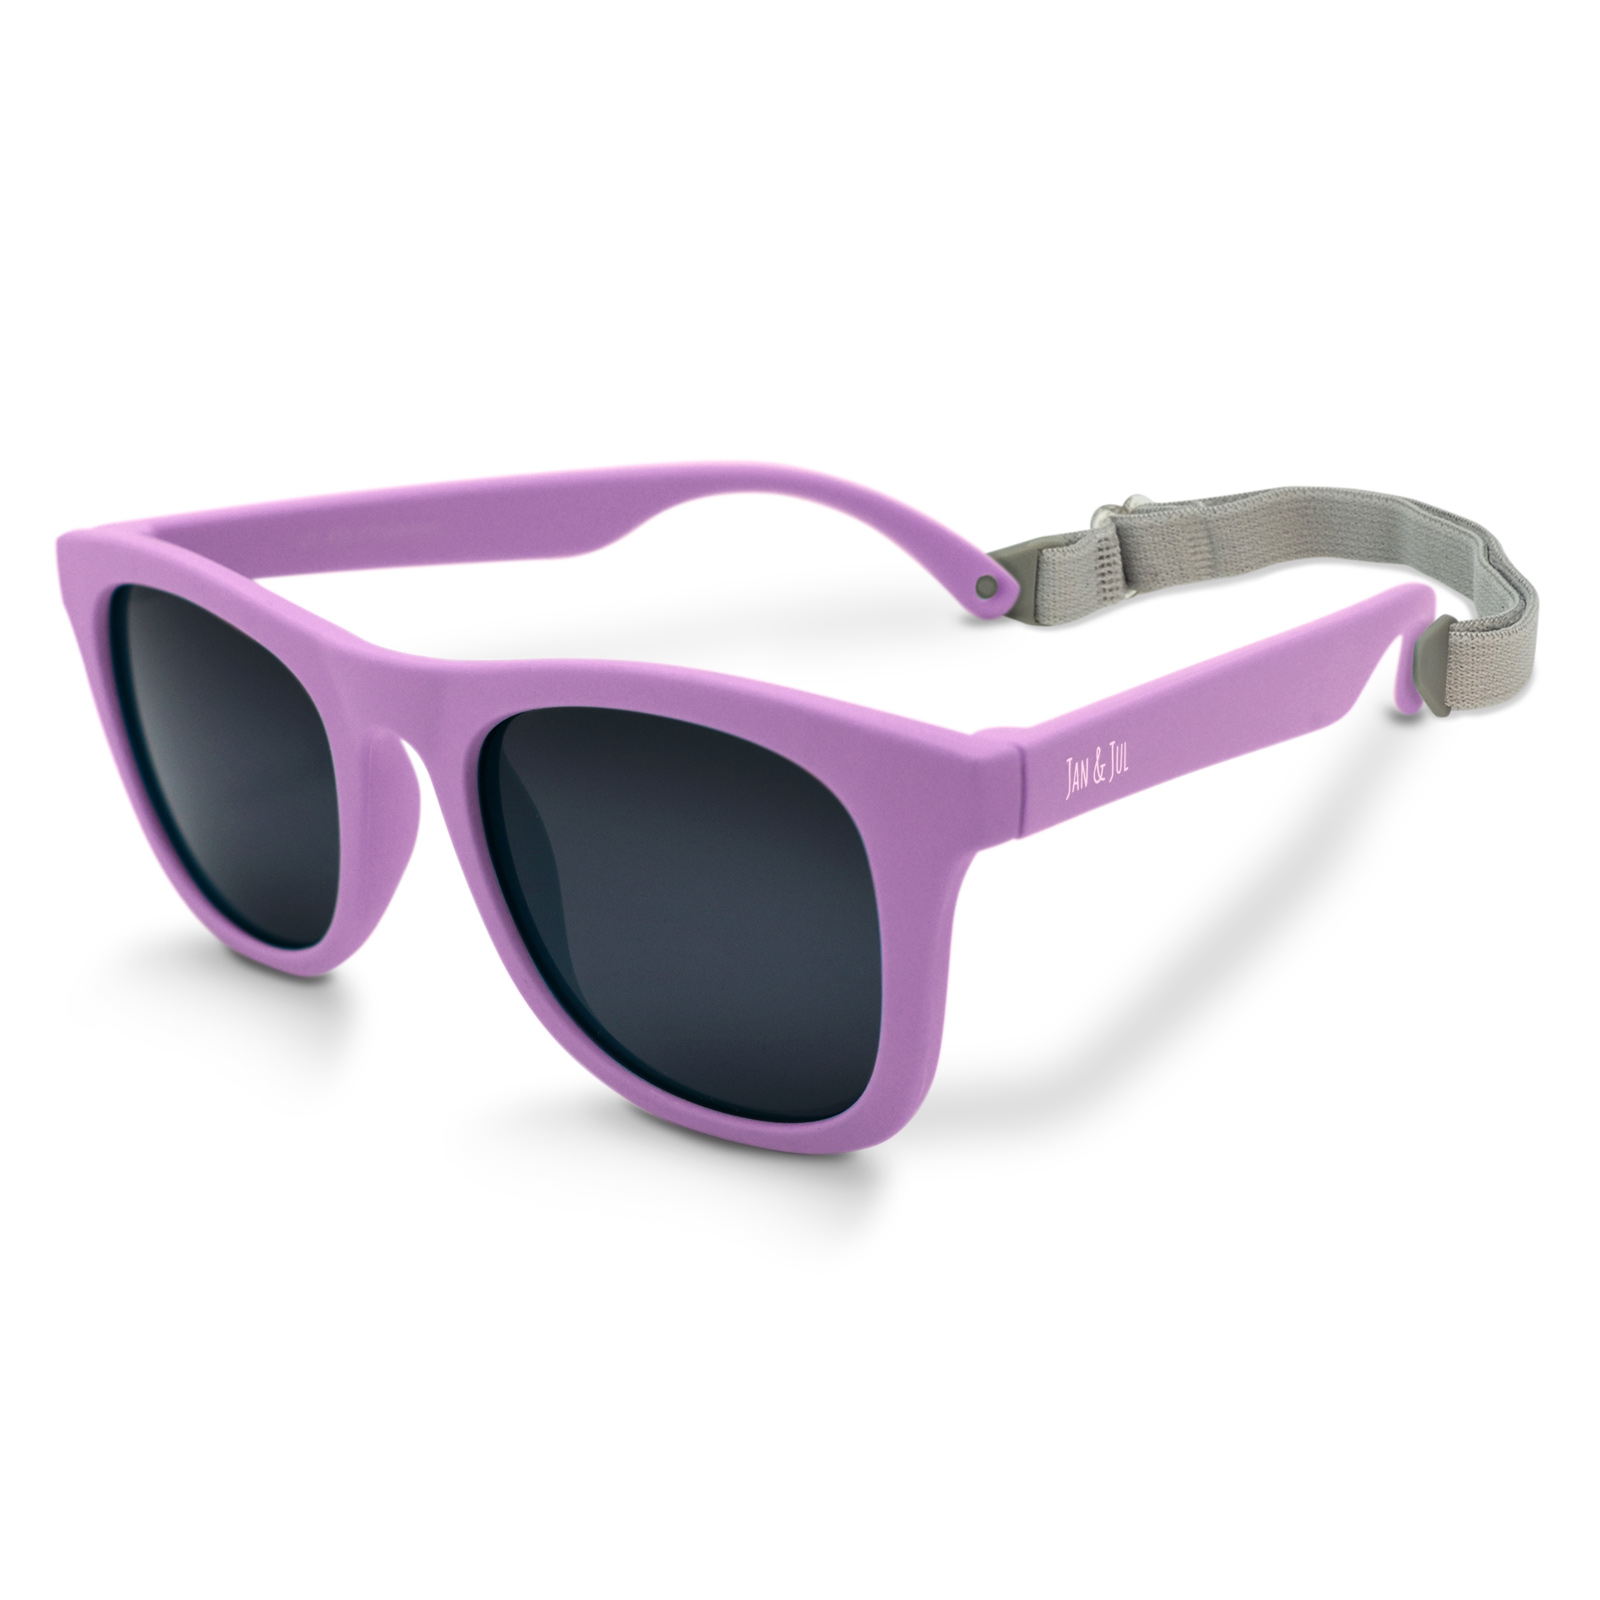 Jan & Jul Baby Sunglasses with Strap for Girls, Polarized, Non-Toxic (S: 6 Months -2 Years, Purple) - image 1 of 7